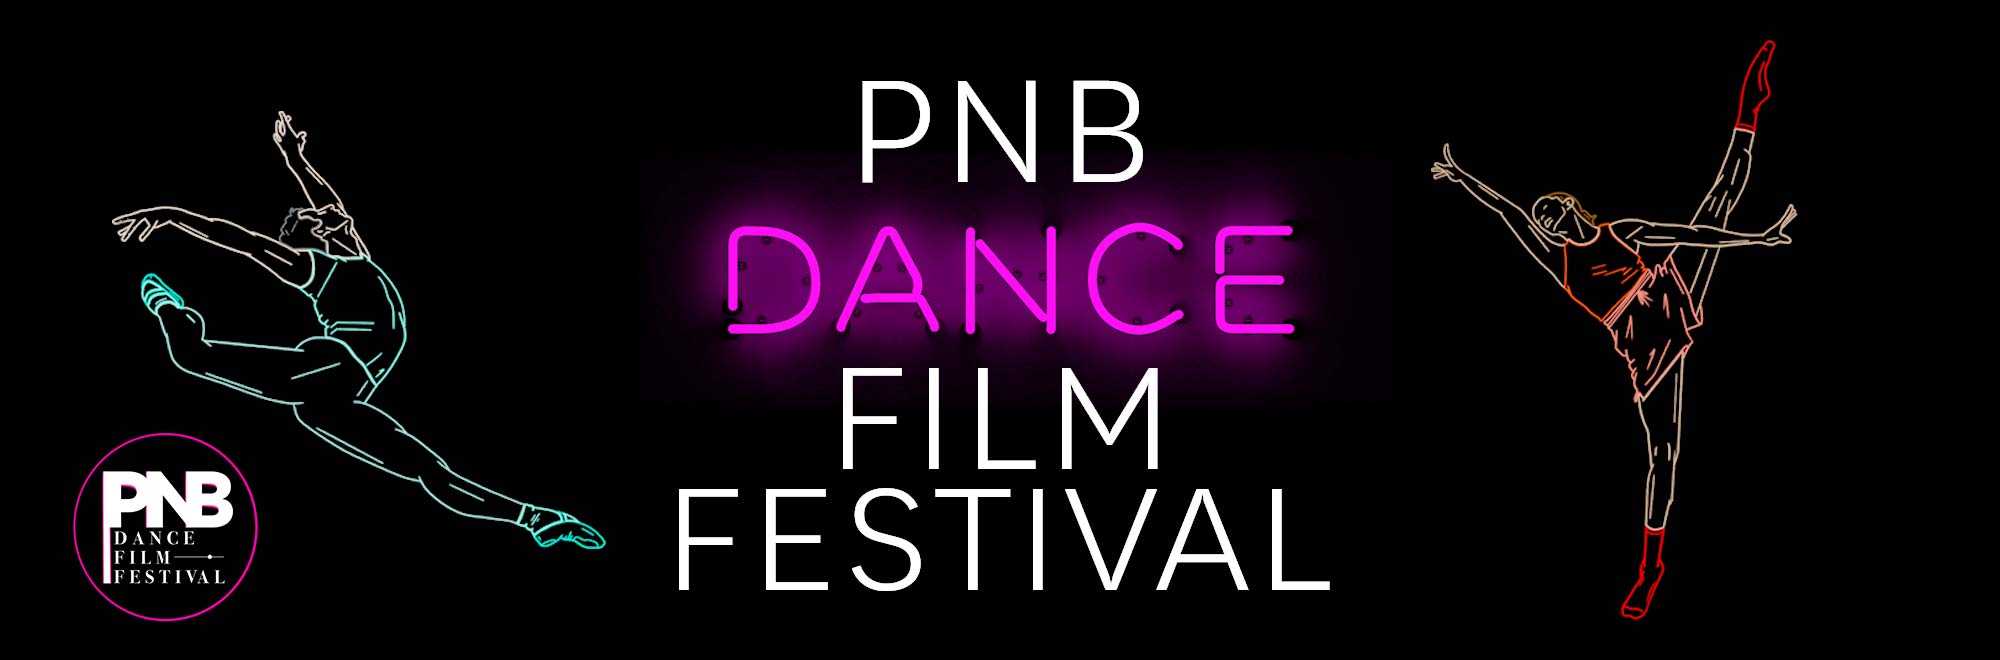 Pacific Northwest Ballet Dance Film festival banner with dancers on the cover